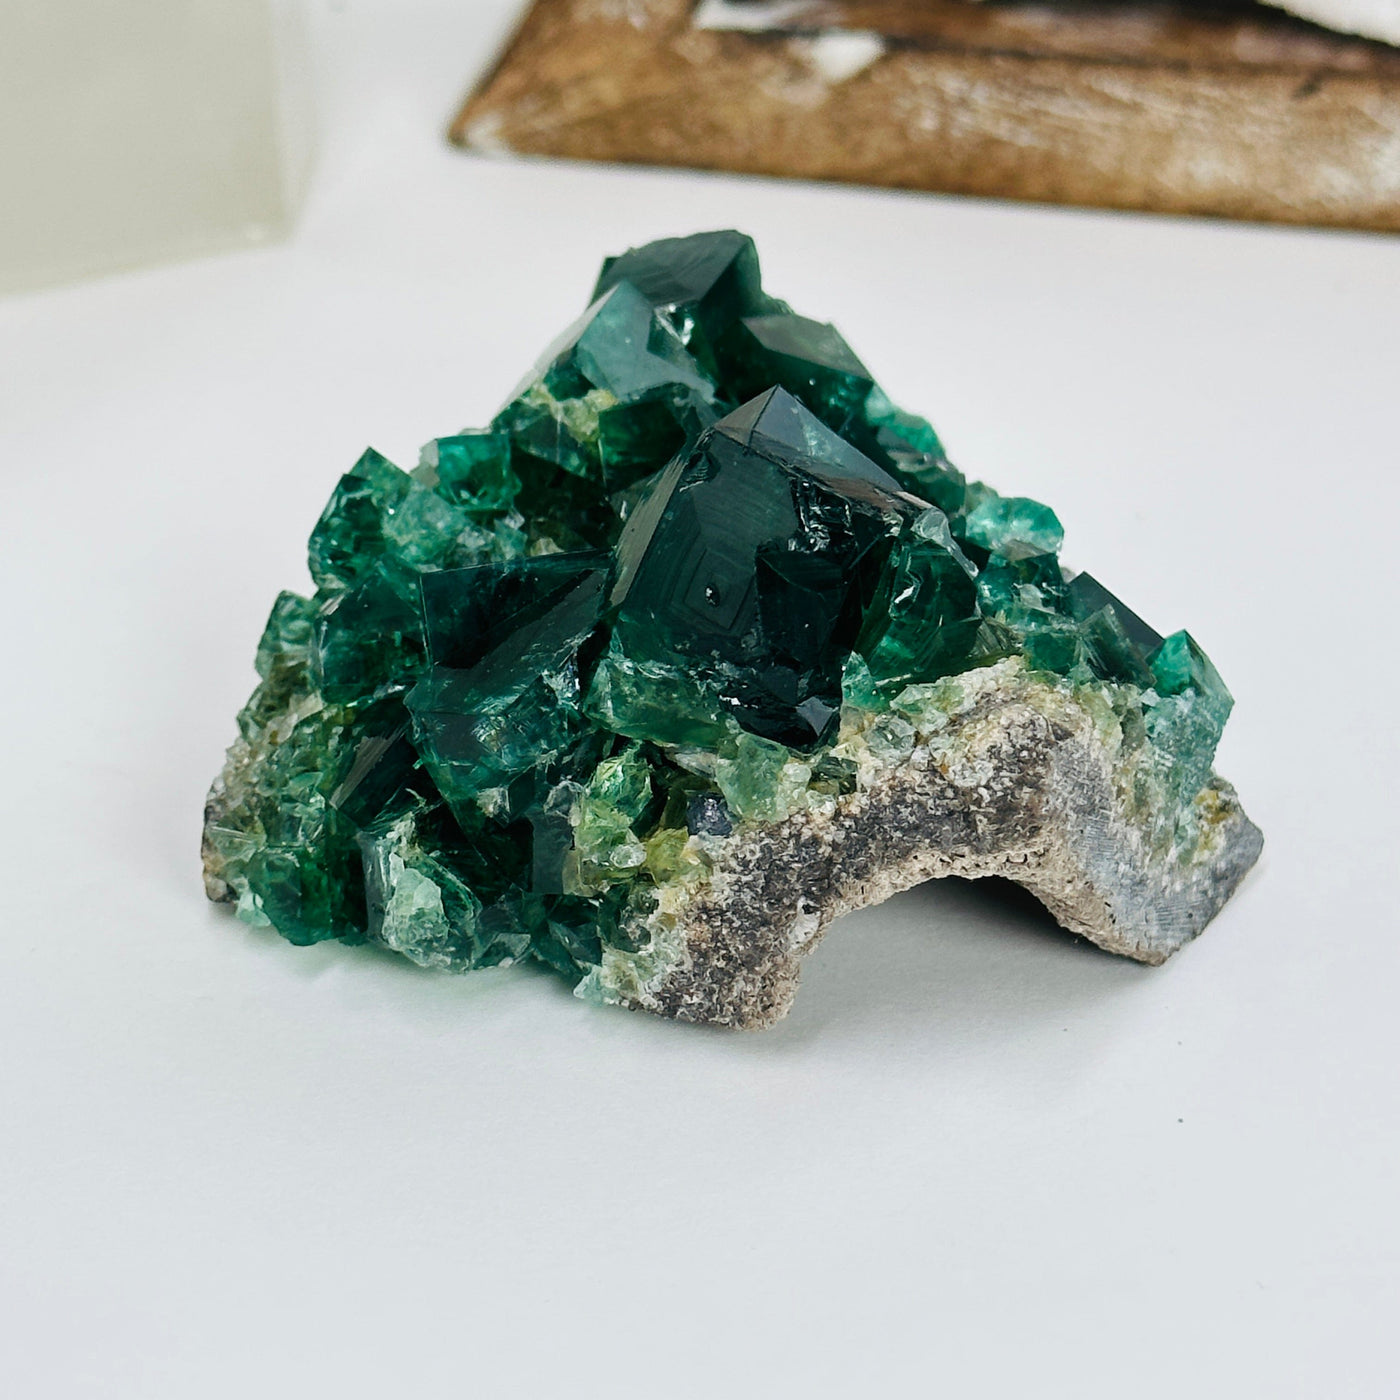 diana maria fluorite with decorations in the background